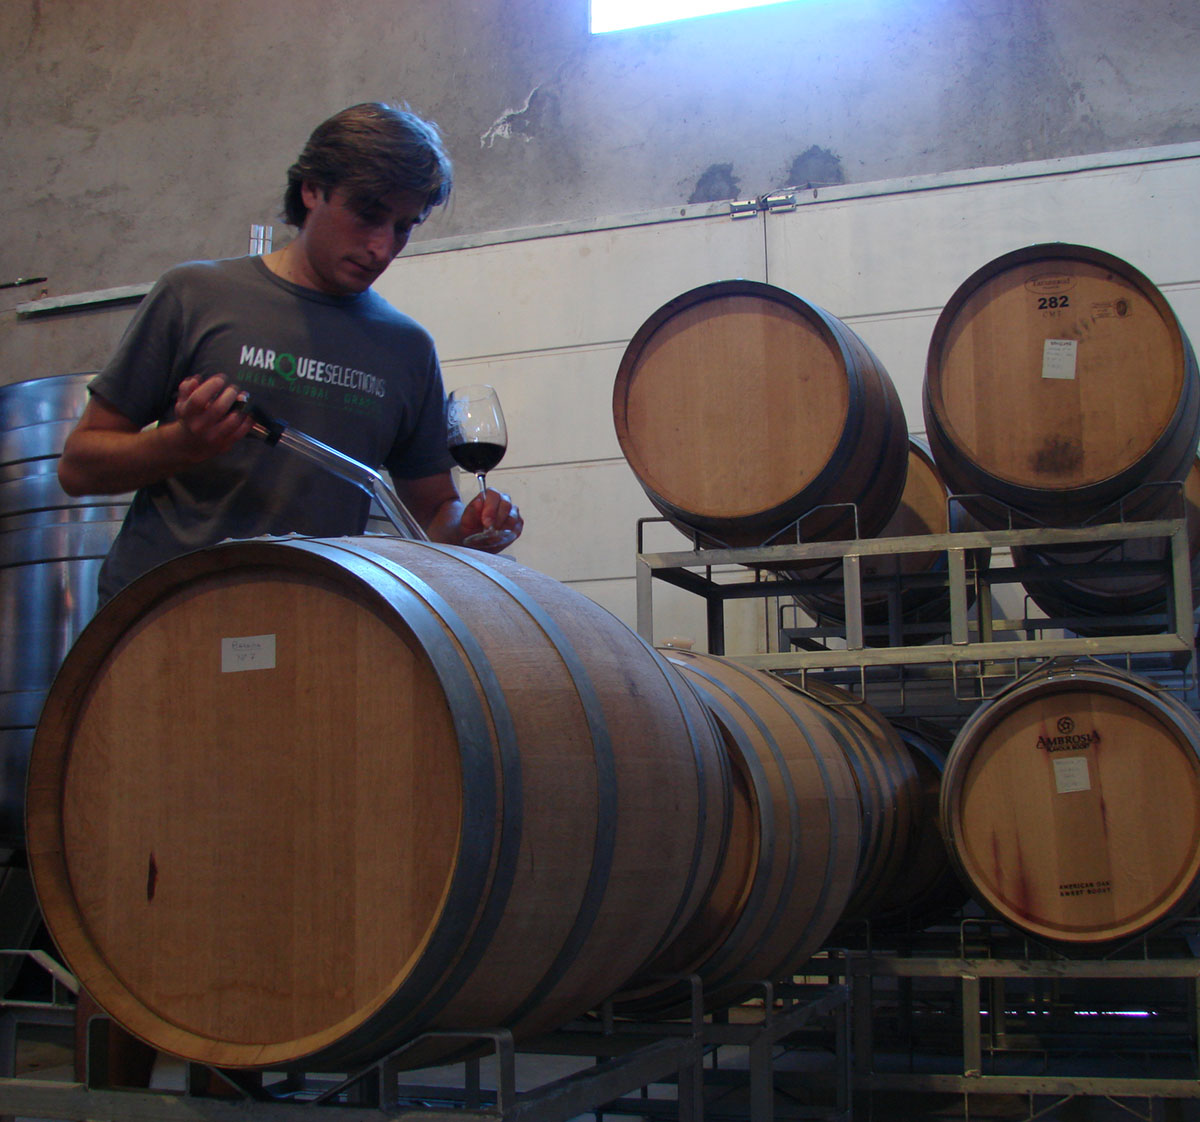 Caligiore owner and winemaker, Gustavo Caligiore, pulling a sample of organic wine from a barrel.